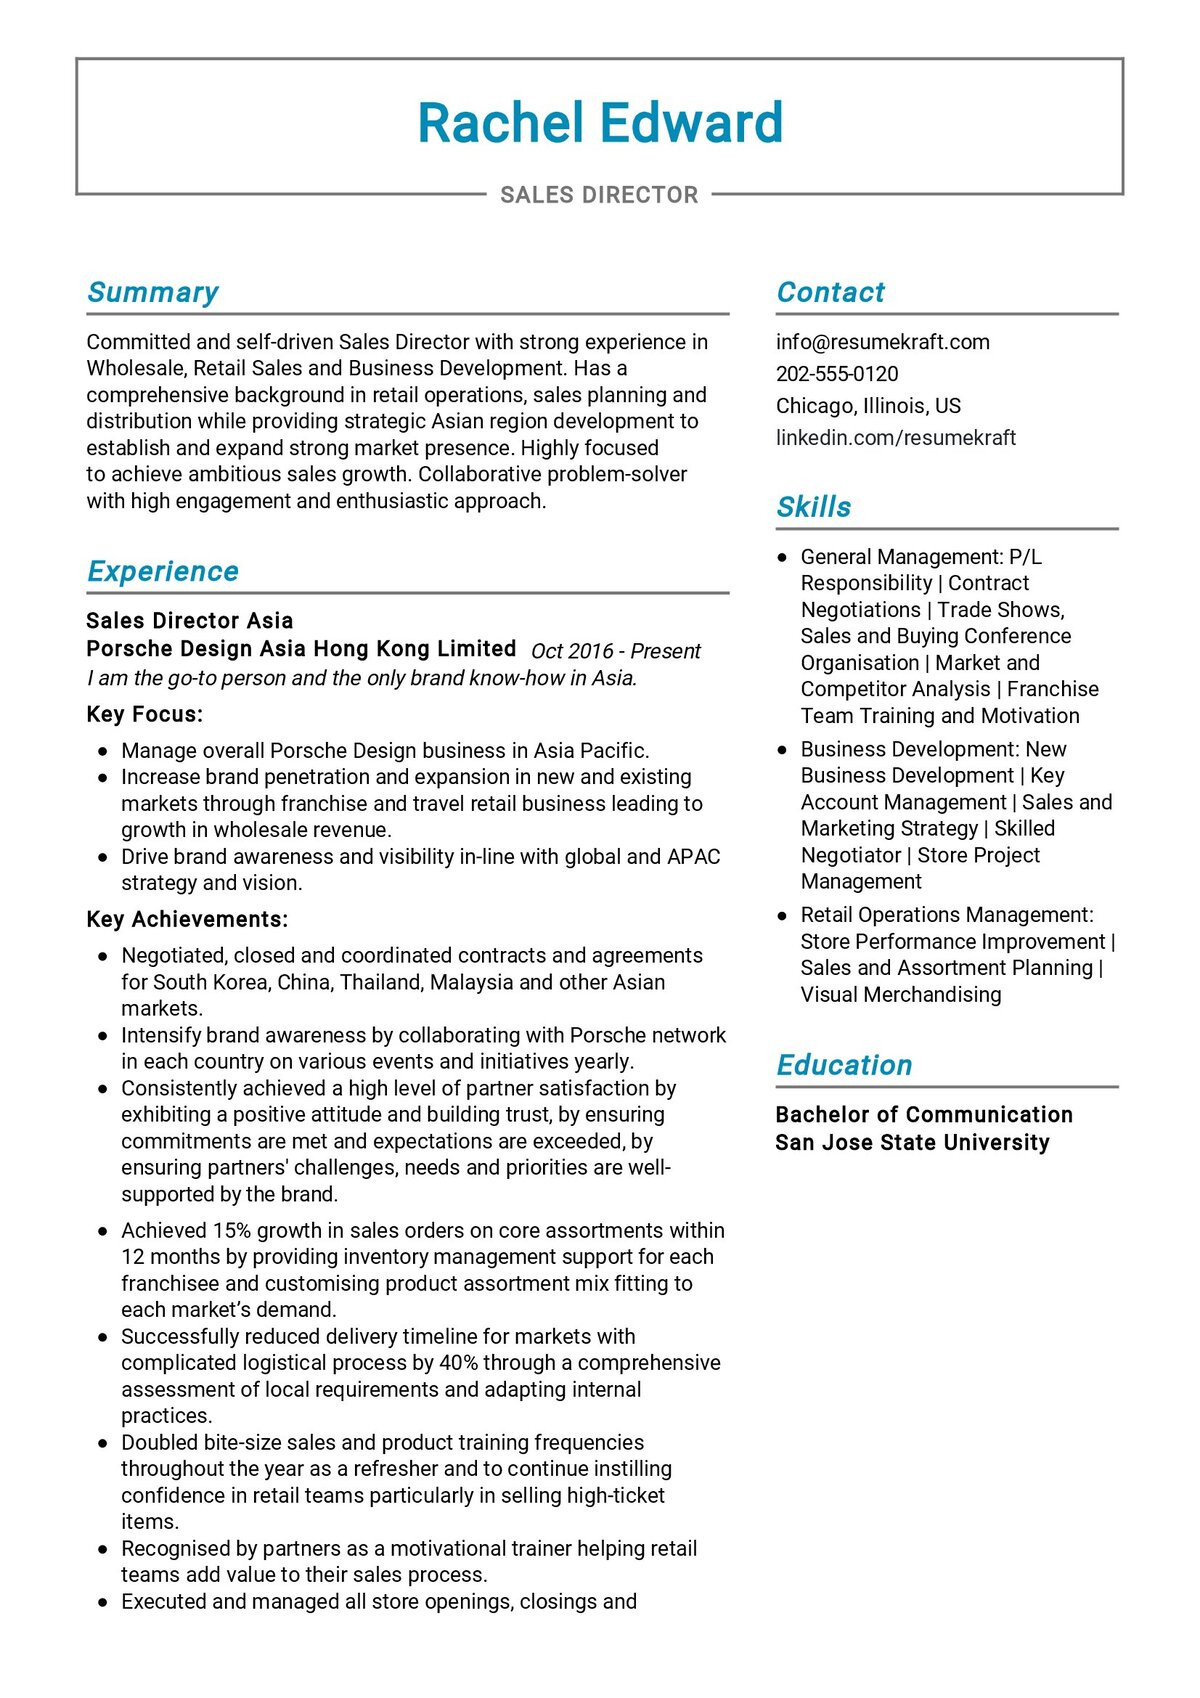 Sample Of Resume for Sales Manager General Manager Sales Director Resume Example 2022 Writing Tips – Resumekraft